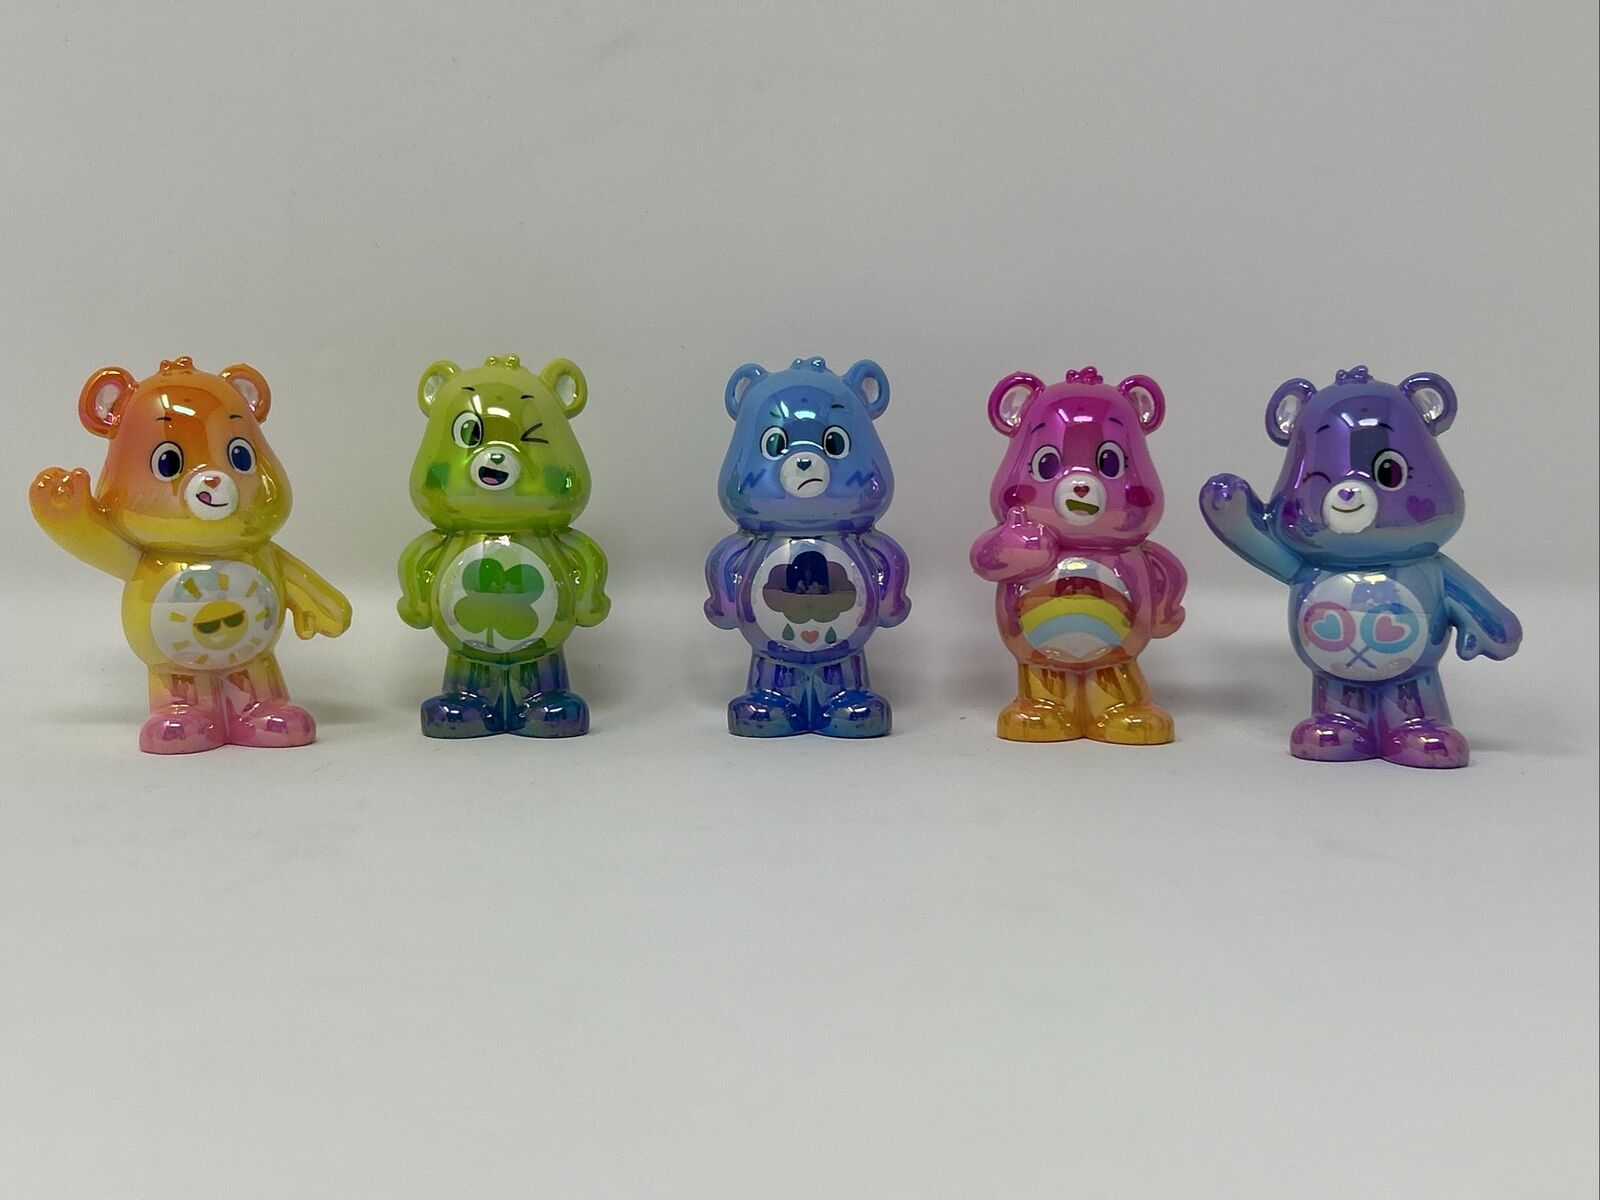 New Care Bears Rainbow Shine Special Collector Set of 5 2020 Bright and Fun